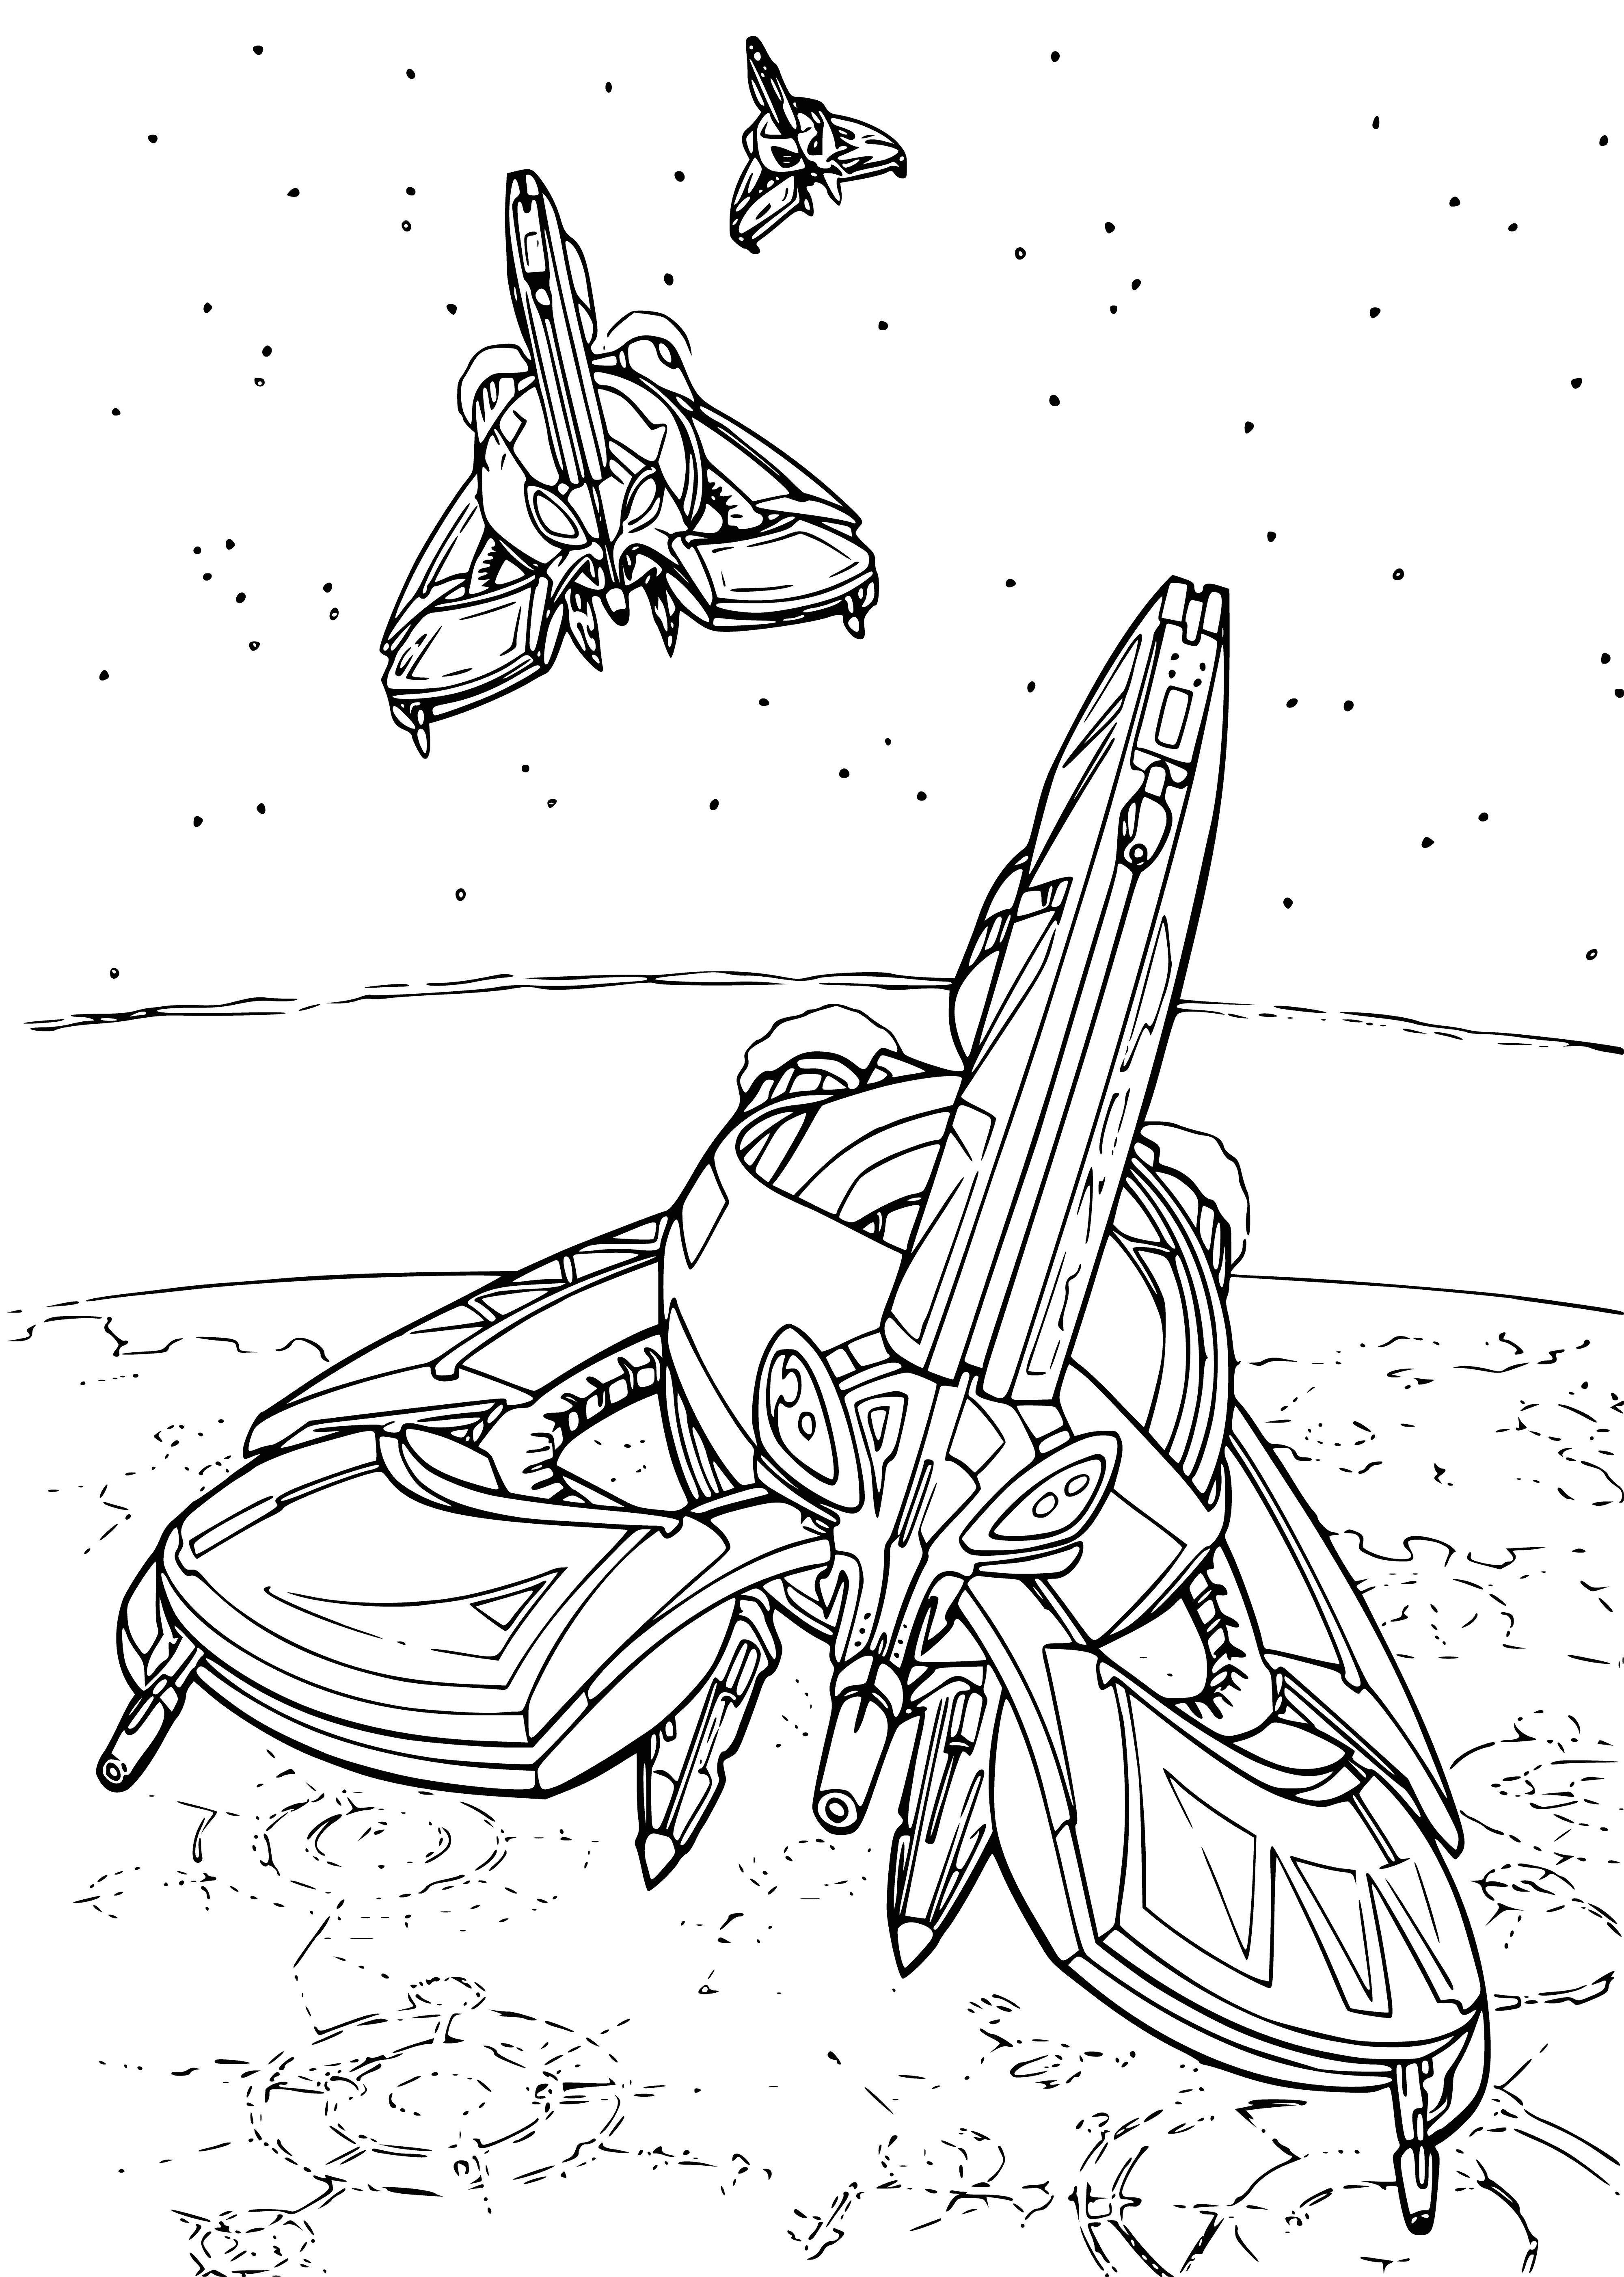 coloring page: Large, round spaceship with cylindrical body & clear cockpit canopy sits in hangar, 2 small wings, covered in panels & large round engines.